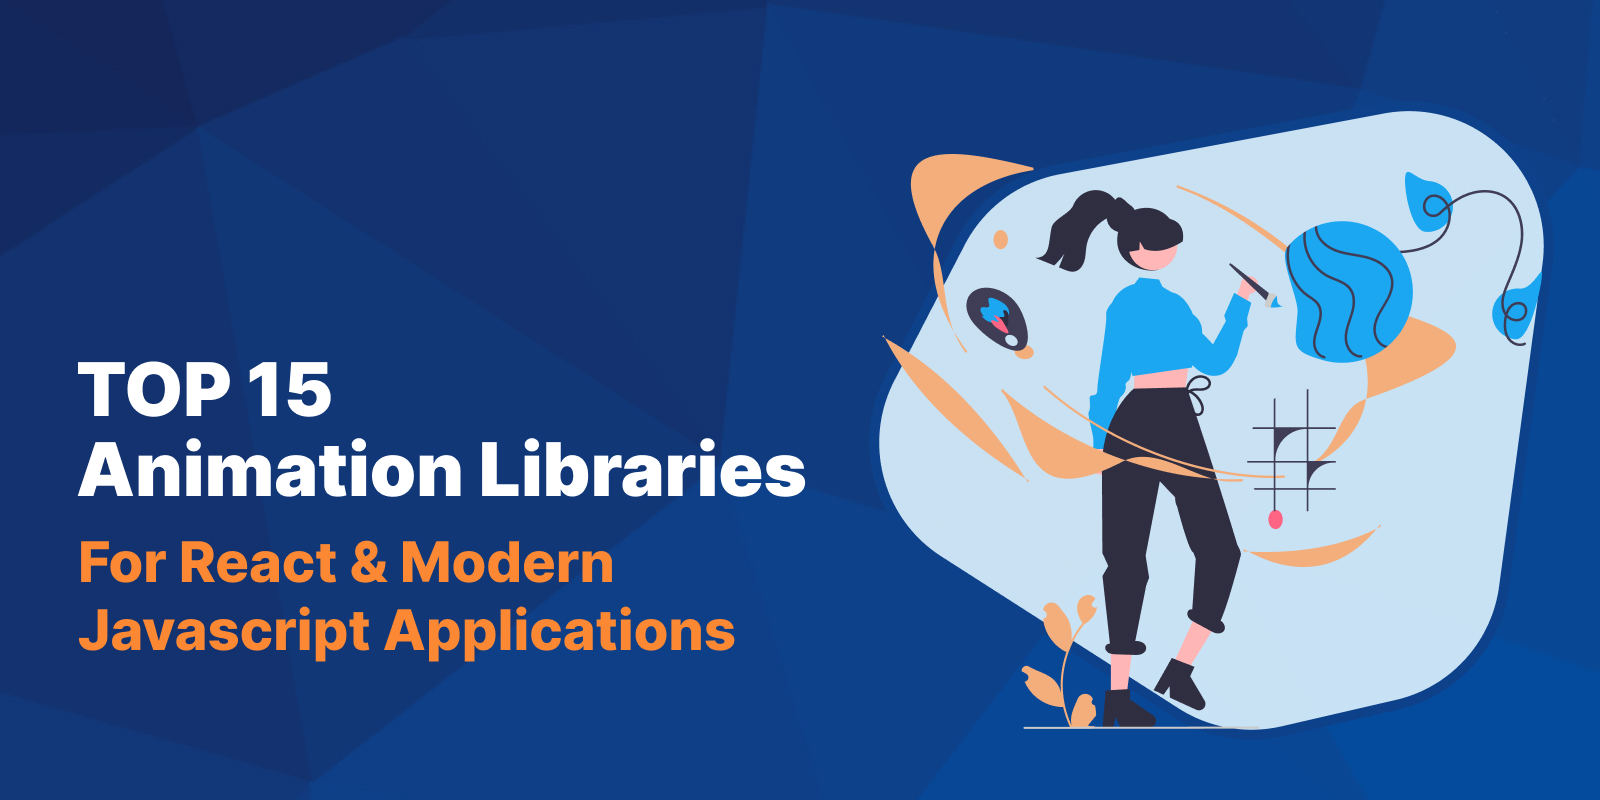 Top 15 Animation Libraries for React & Modern Javascript Apps